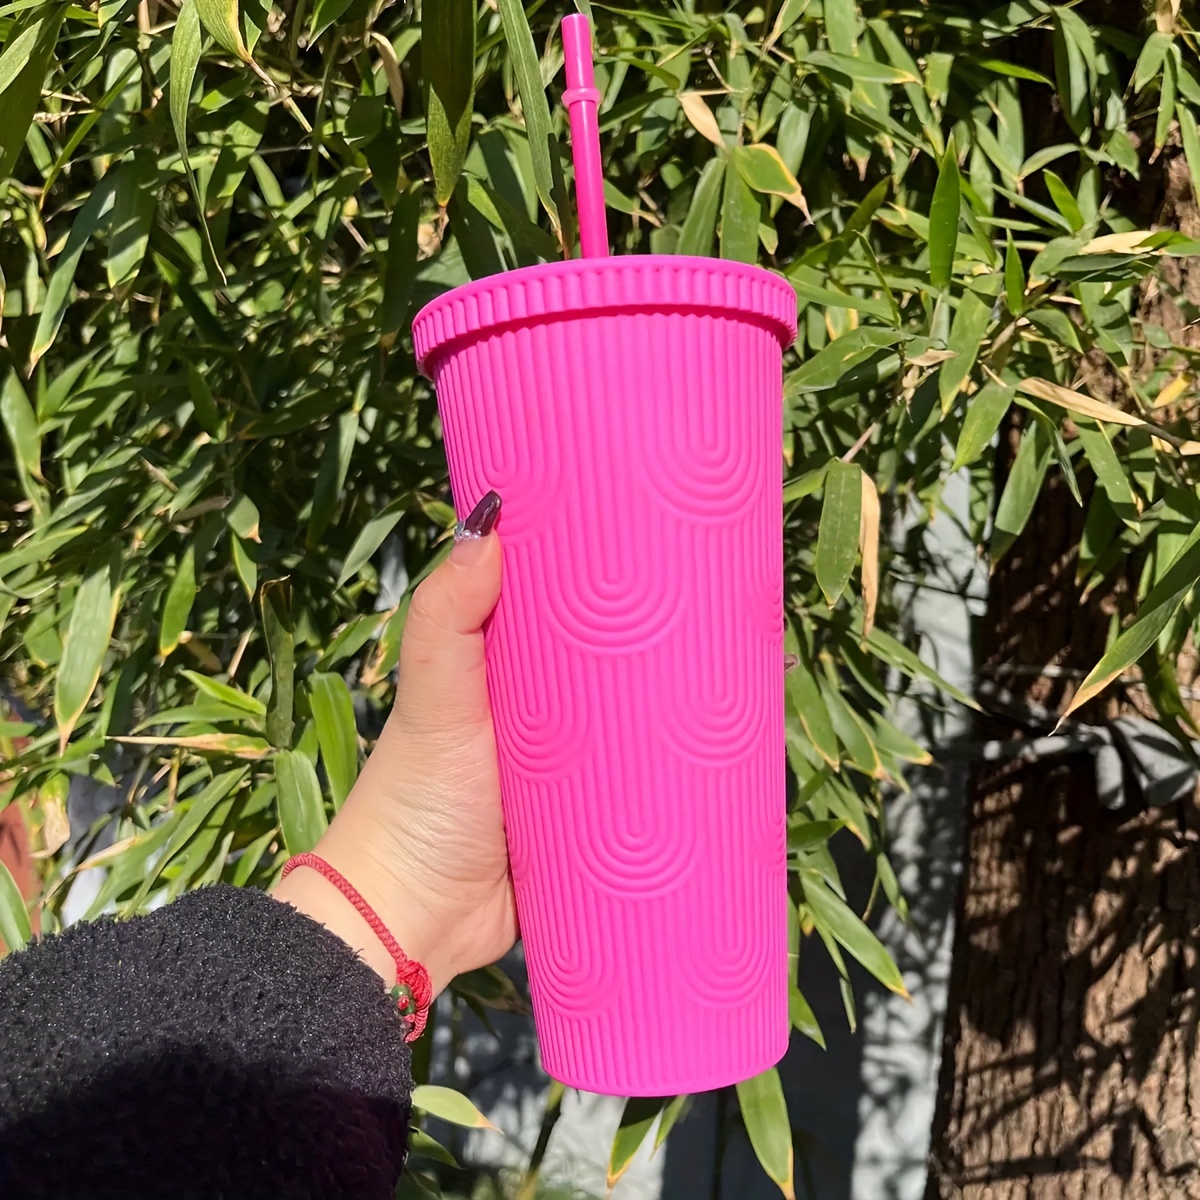 TCJJ Straw Cup With Lid Double-layer Reusable Drinking Cup Plastic Tumbler  Transparent Tea Fruit Coffee Mugs DIY Water Bottle